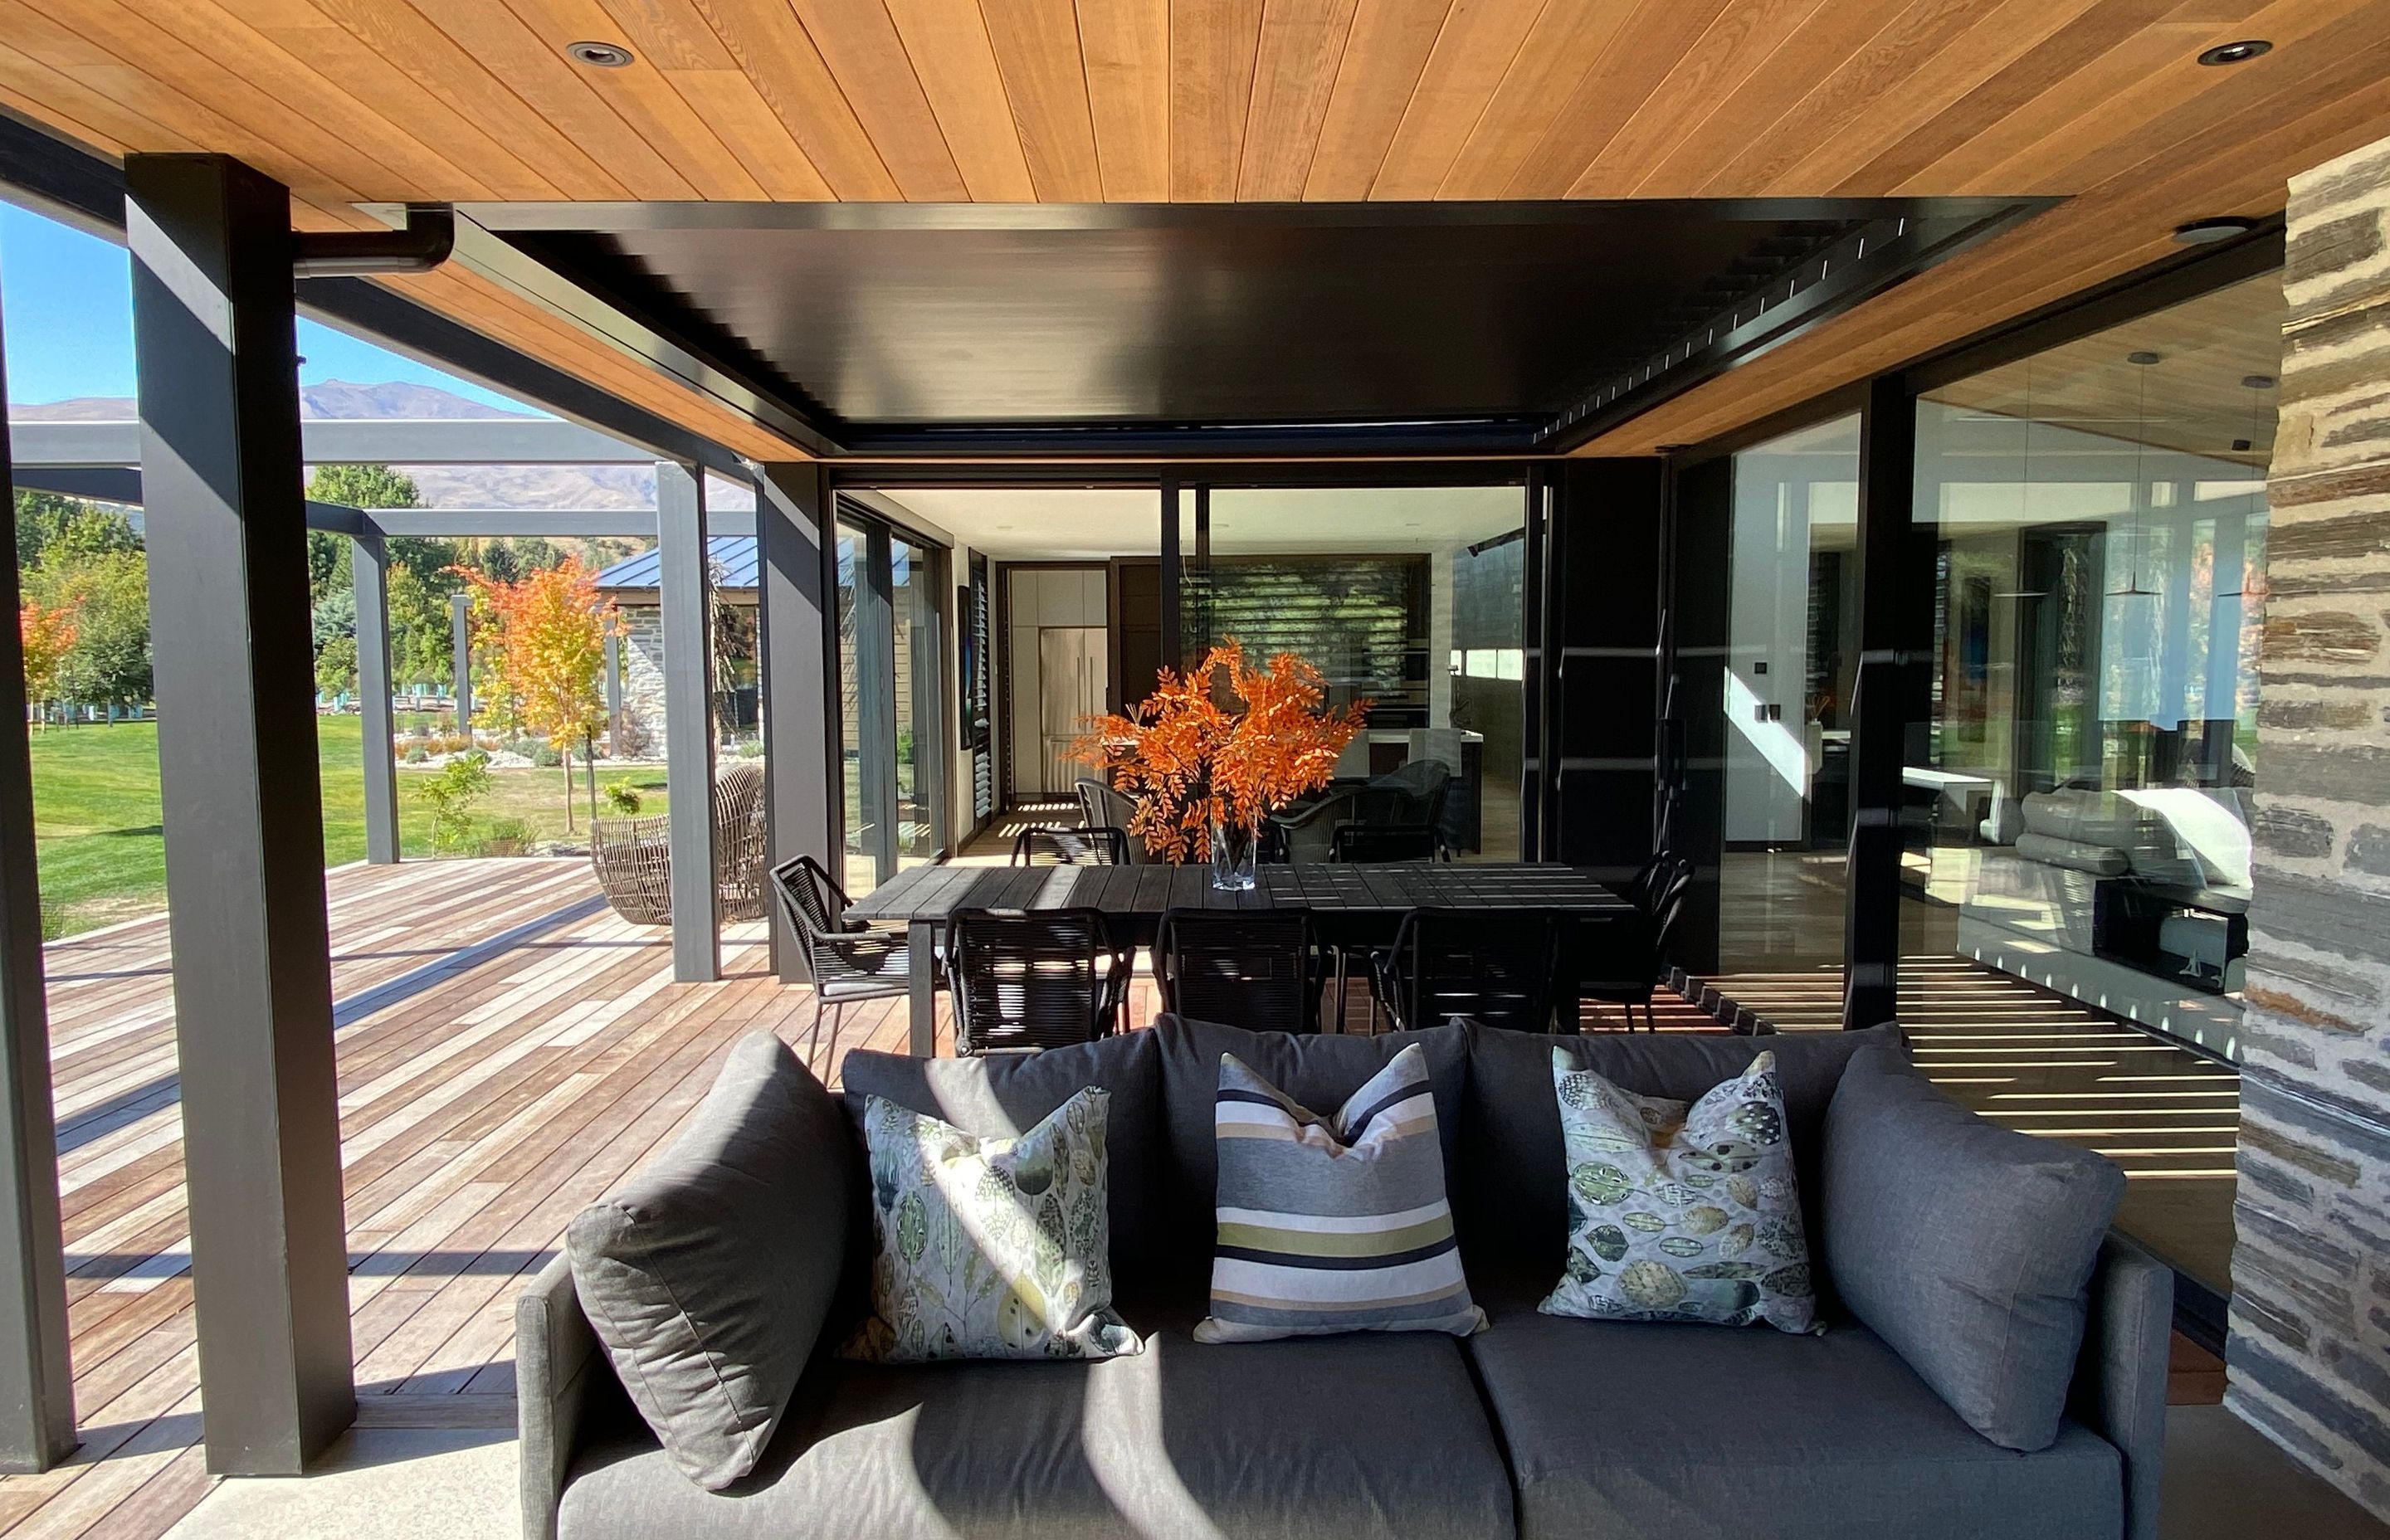 Consideration of the outdoor living spaces was an integral part of the homes design